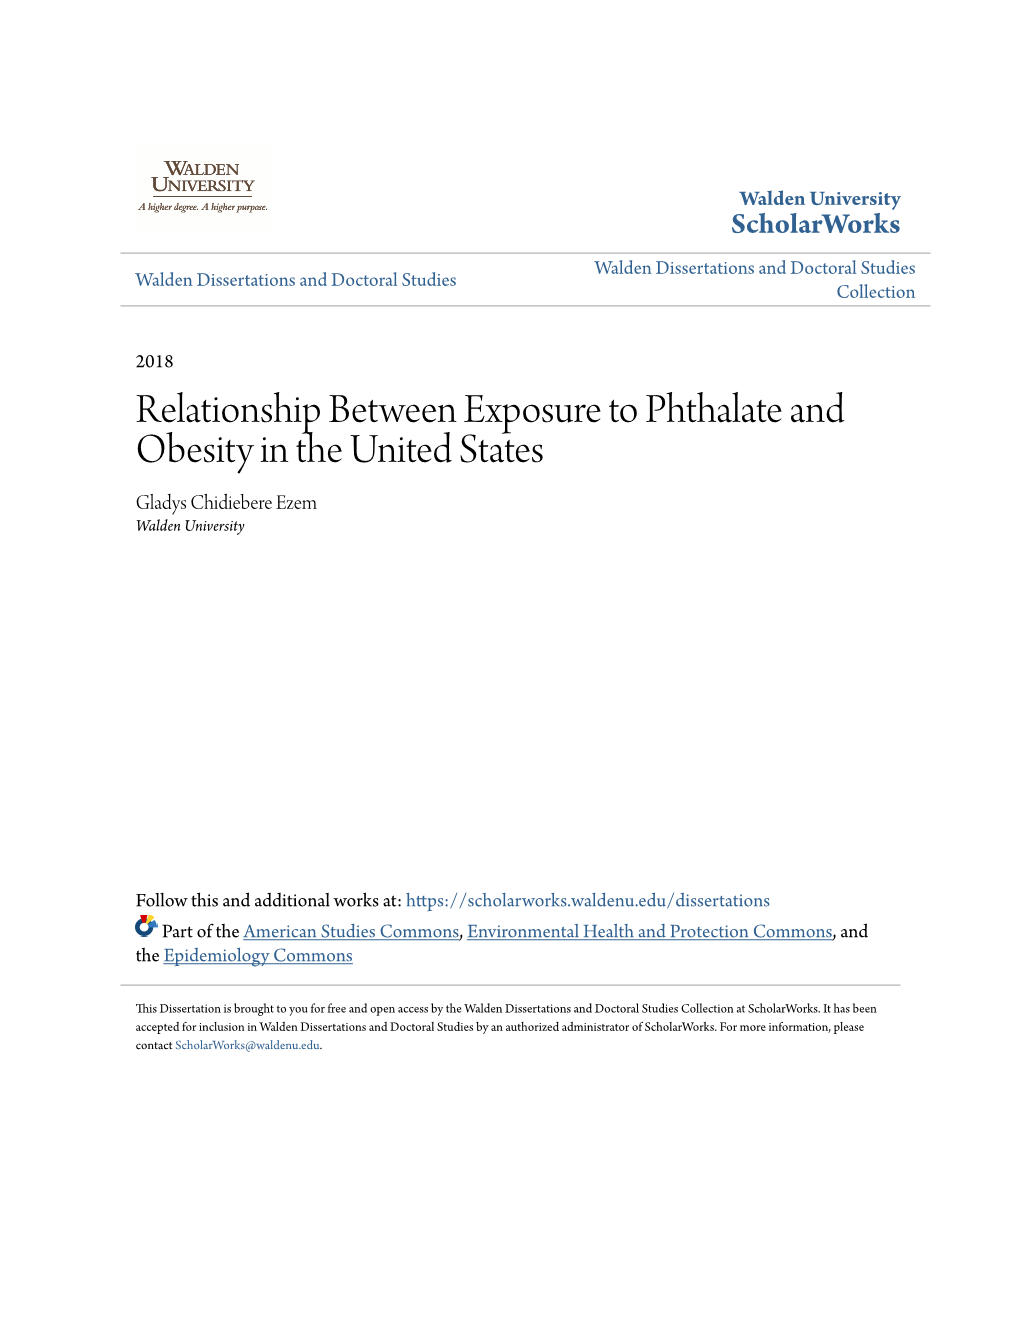 Relationship Between Exposure to Phthalate and Obesity in the United States Gladys Chidiebere Ezem Walden University